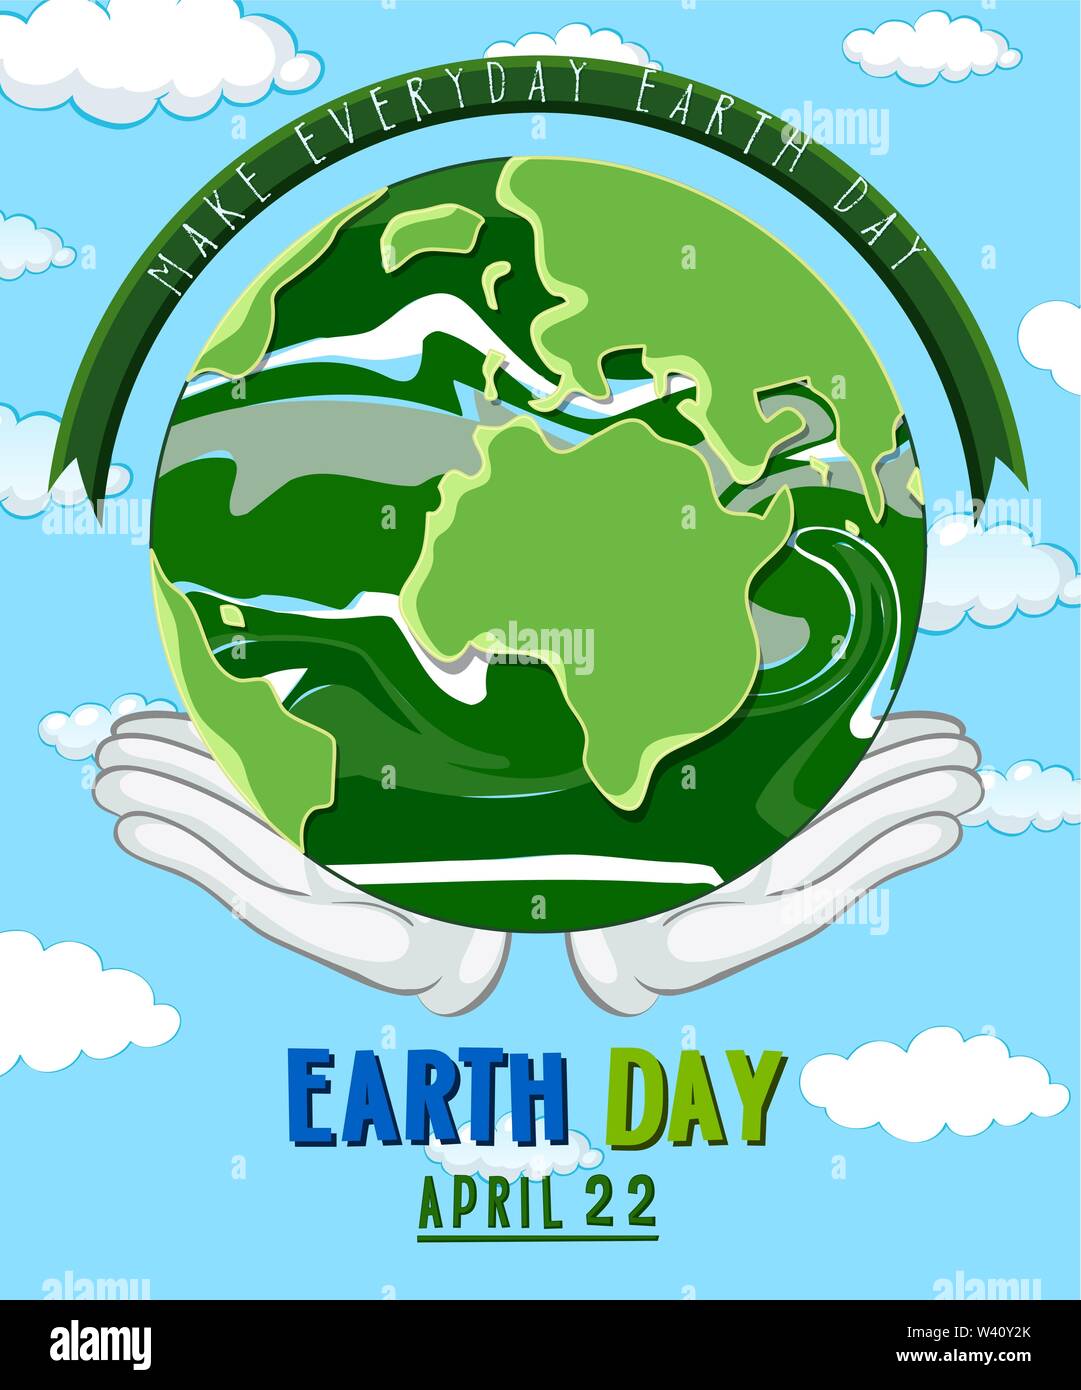 Hands holding earth day poster illustration Stock Vector